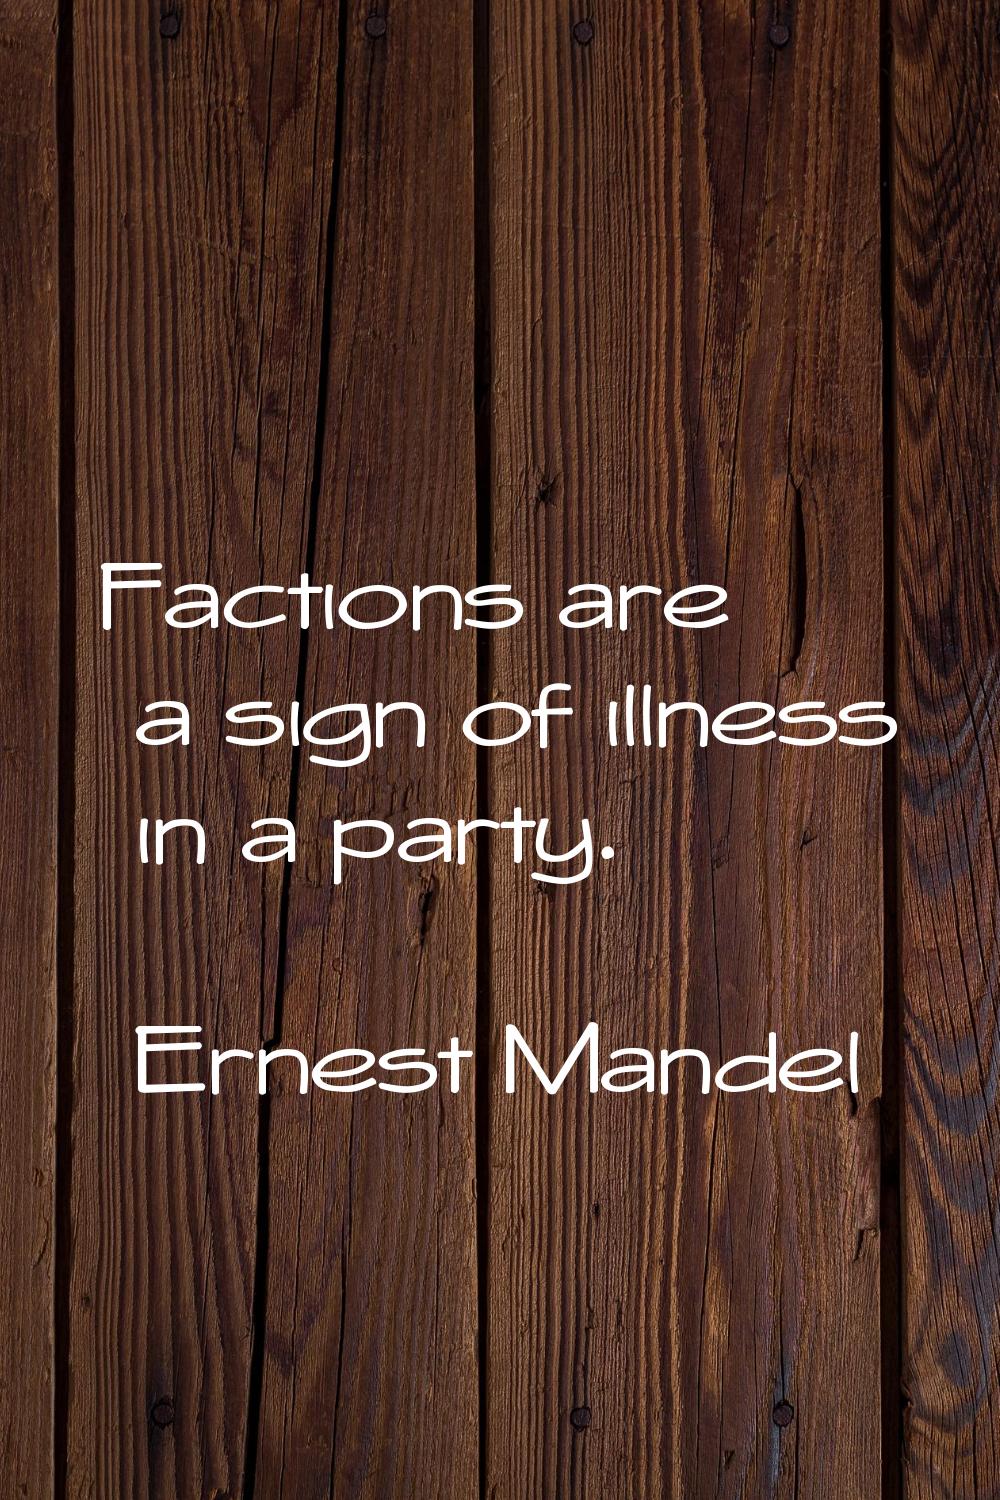 Factions are a sign of illness in a party.